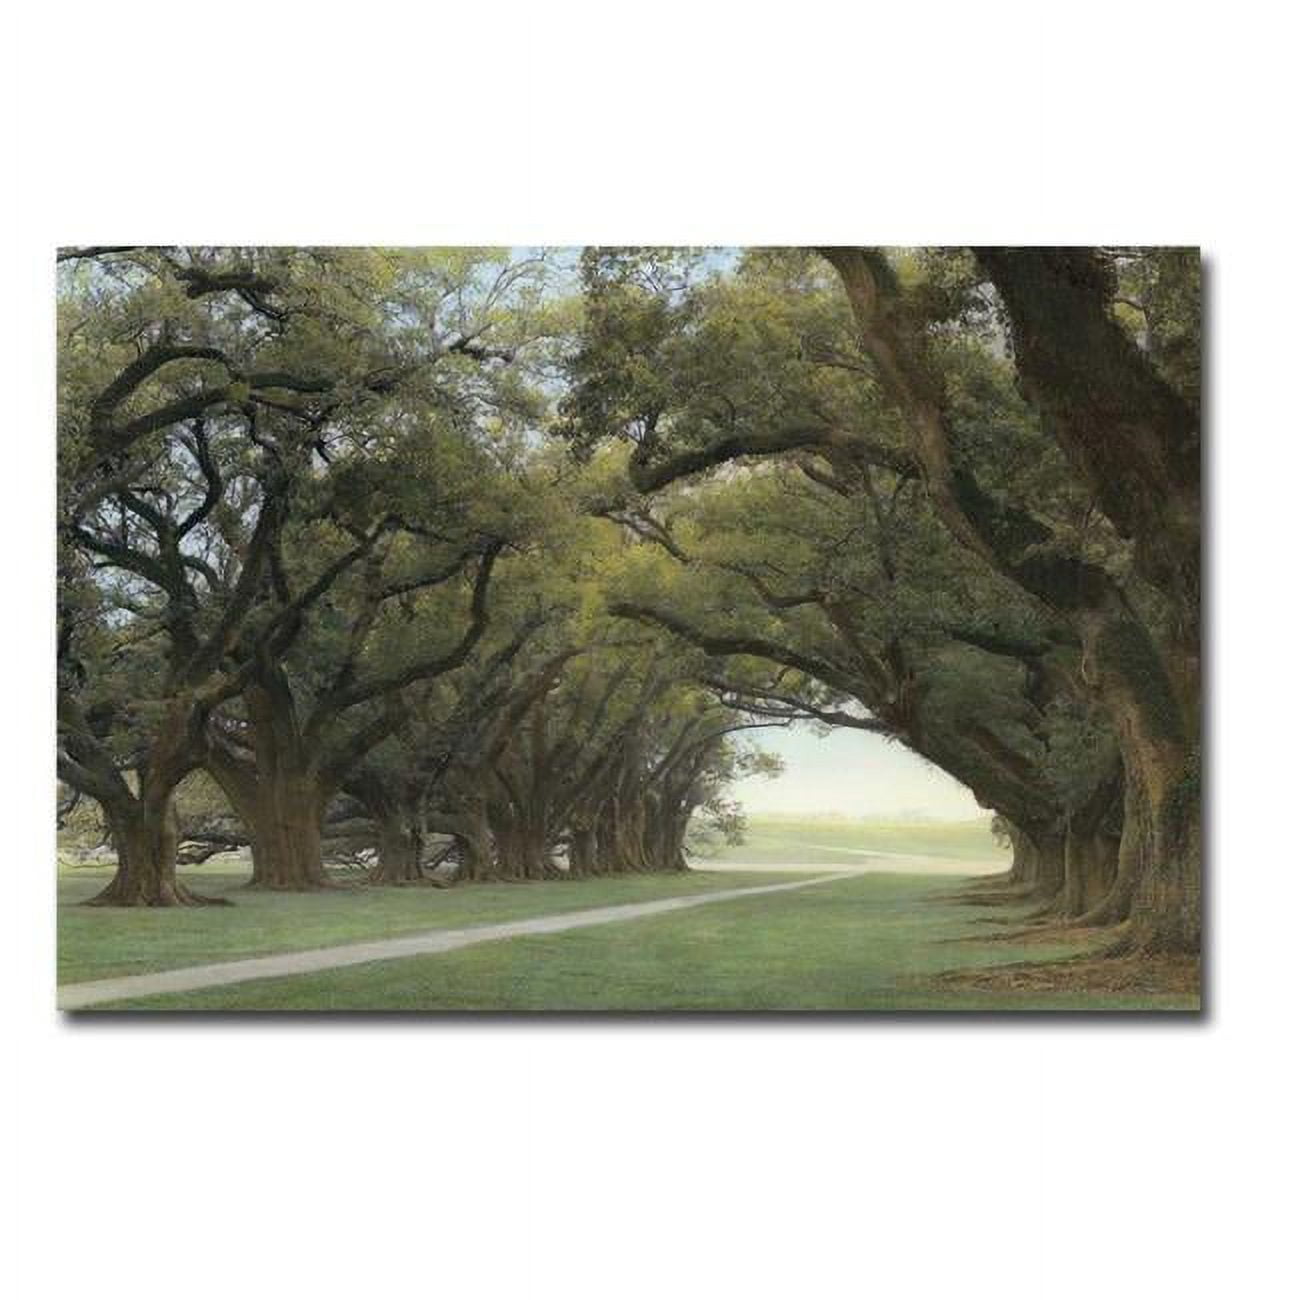 1624u798cg Alley Of The Oaks By William Guion Premium Gallery-wrapped Canvas Giclee Art - 16 X 24 X 1.5 In.